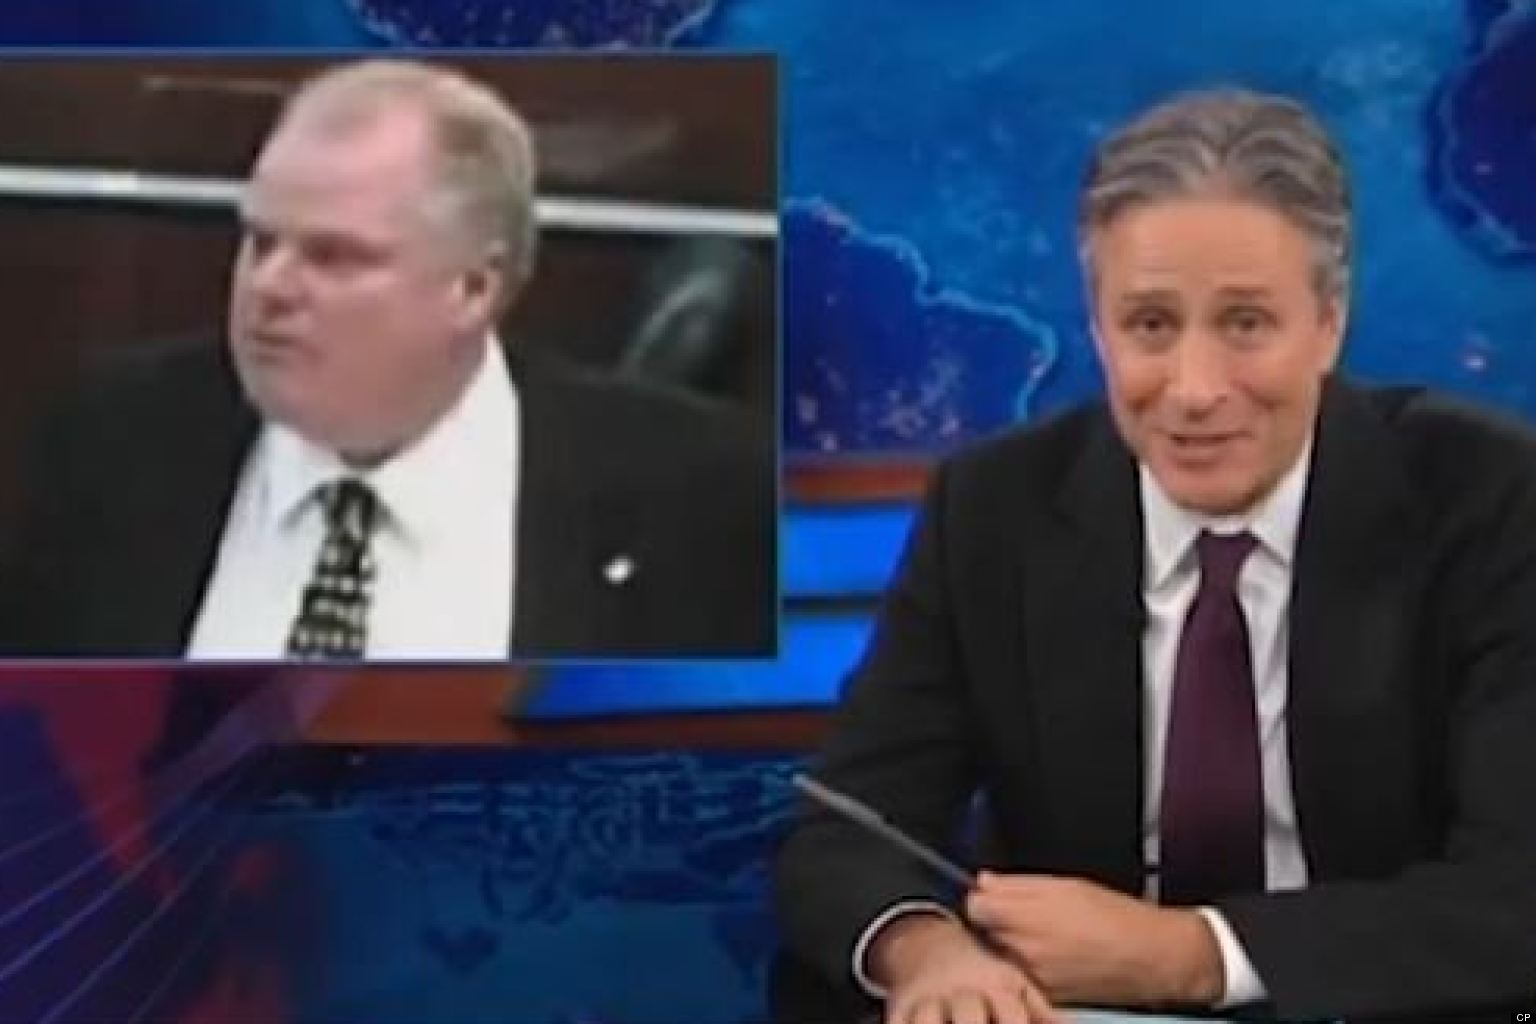 Rob ford on daily show #2